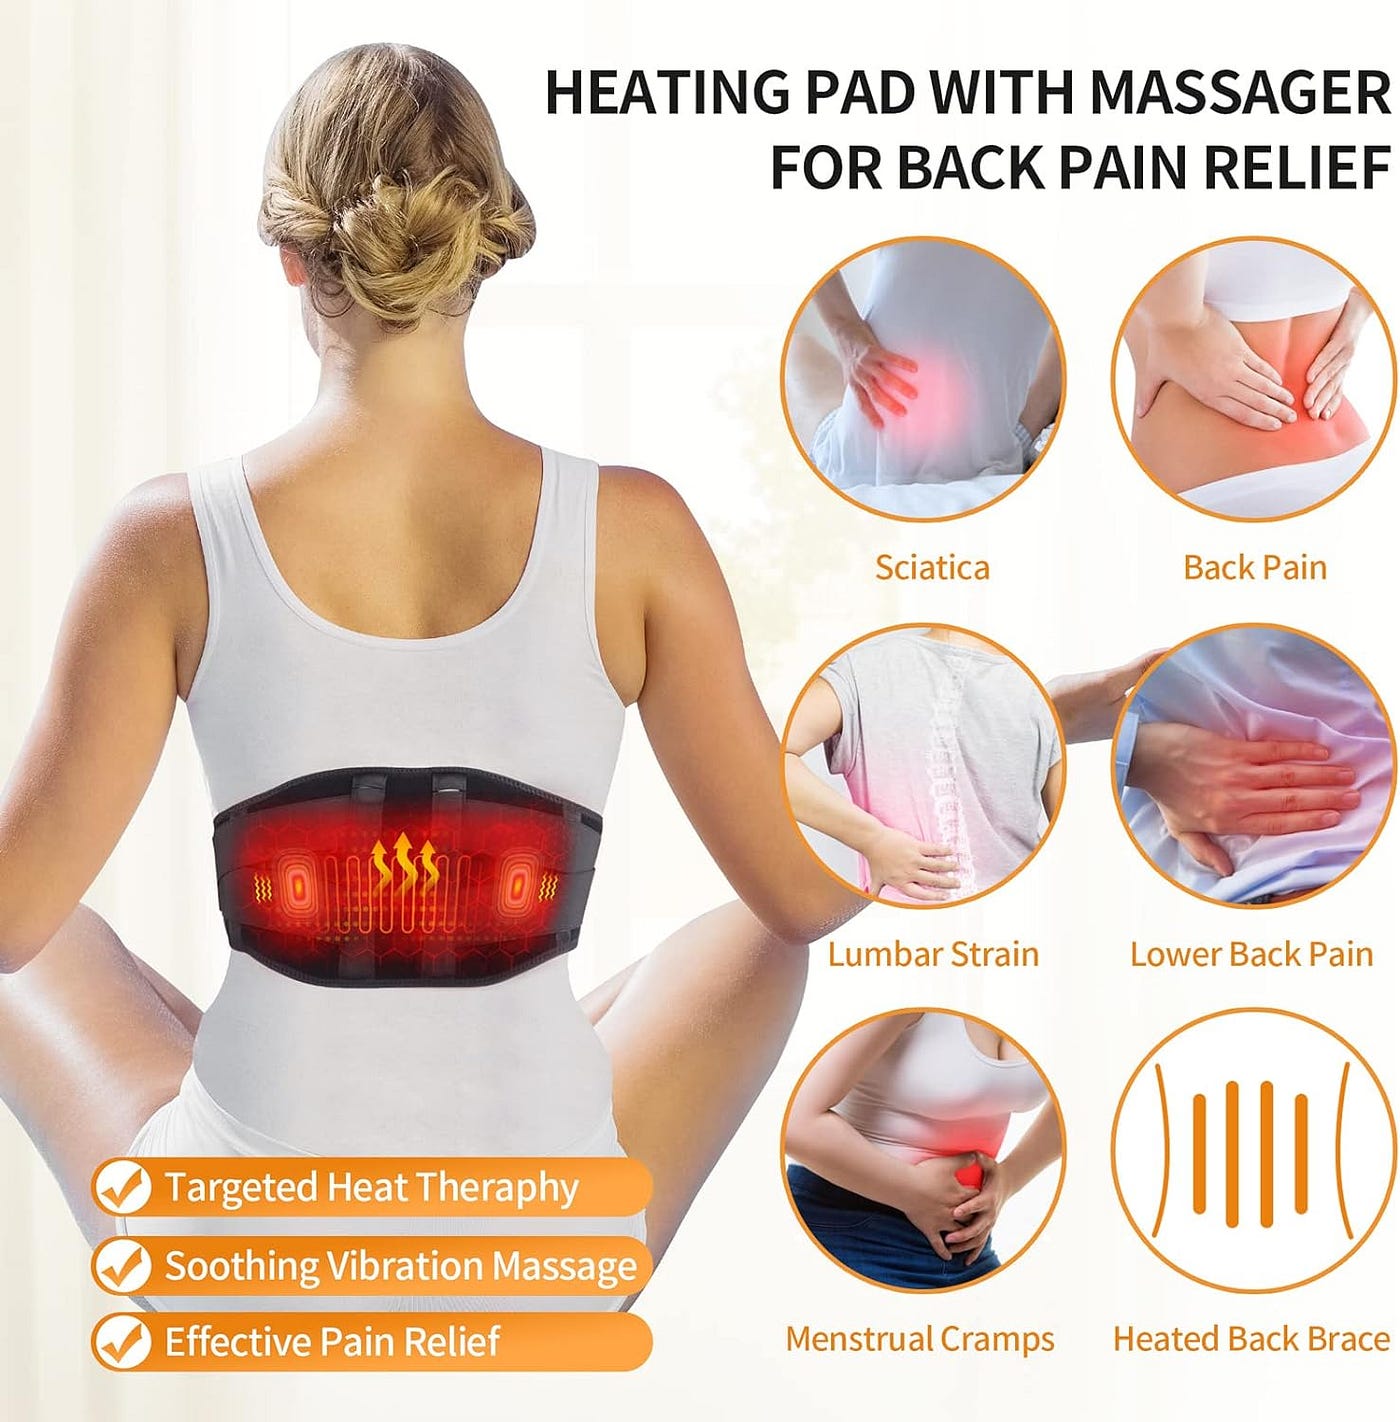 Relieve Your Back Pain with a Heated Back Brace - Henk Peter De